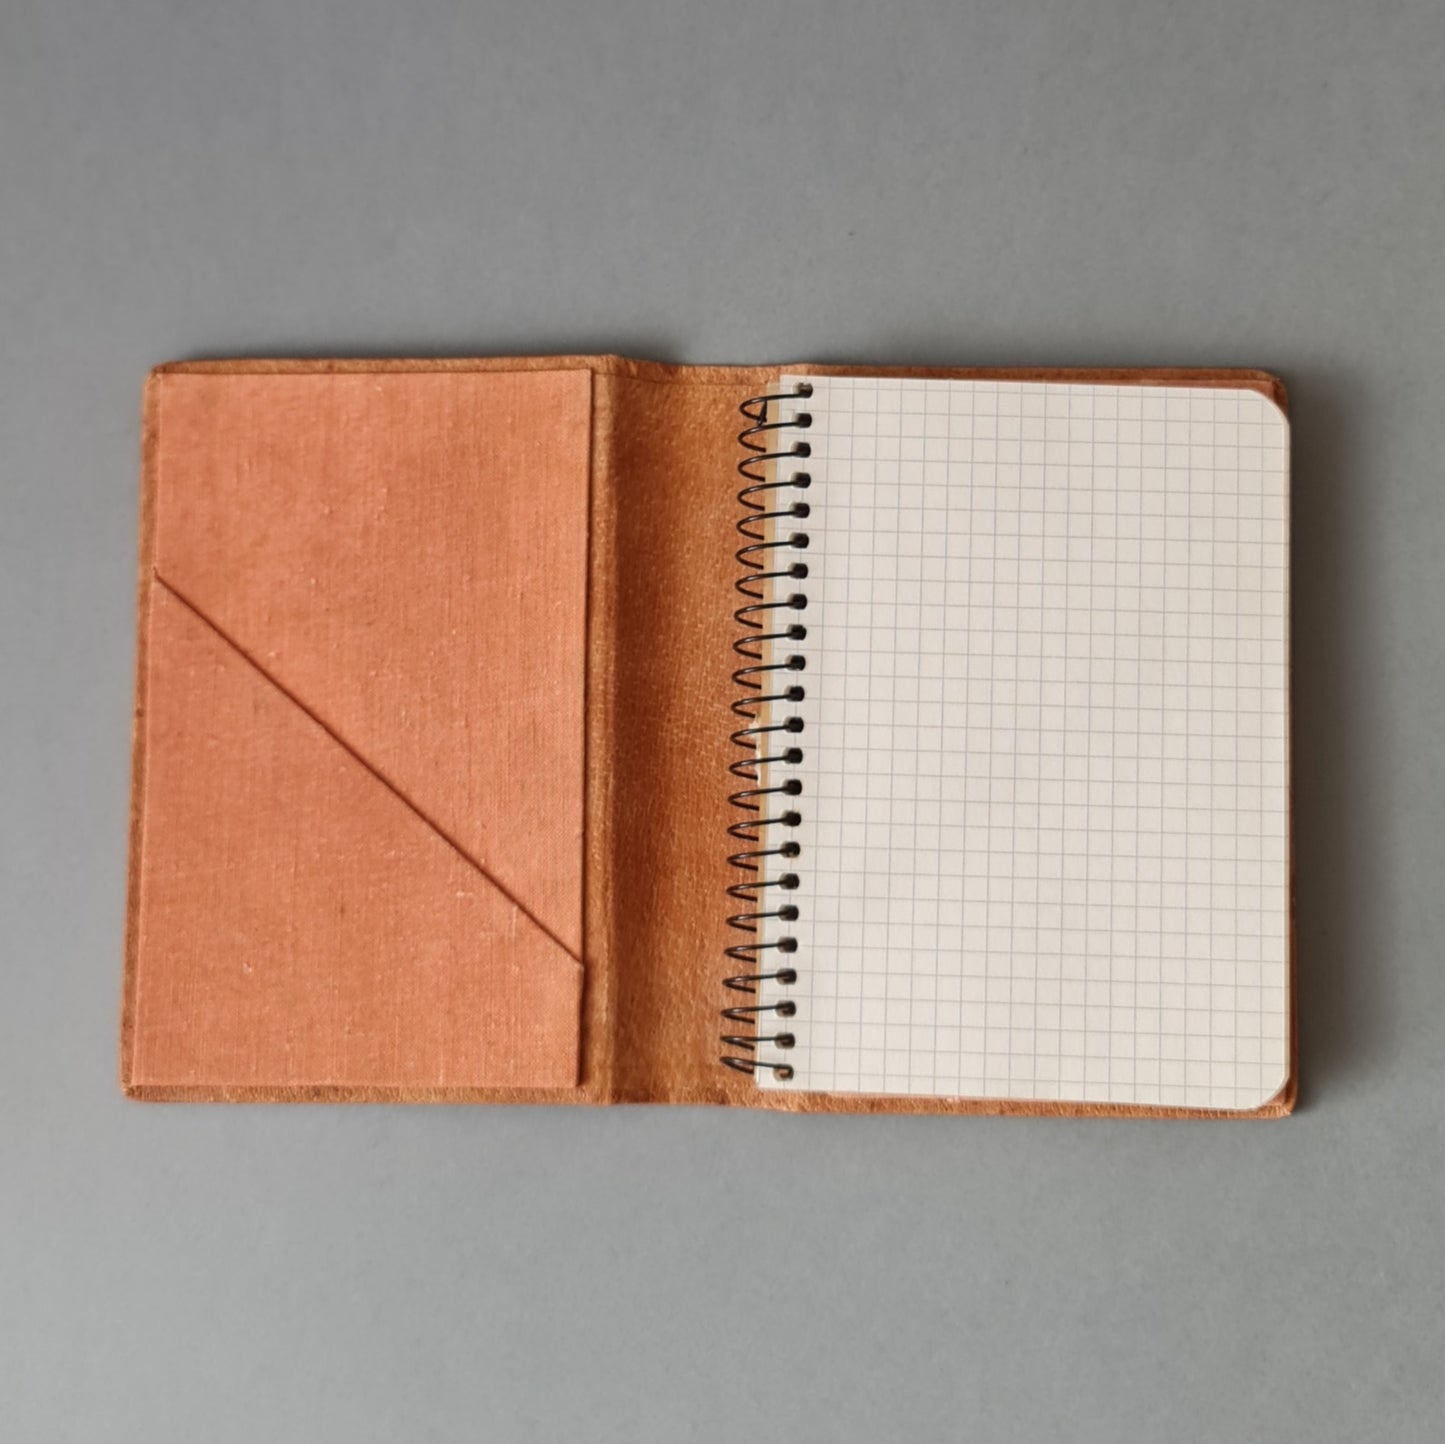 Checked notebook in a leather case with an additional compartment and the possibility to replace the notebook with a spiral. Brown color with decorative print. 11.8 x 15.6 x 1.5 cm (MAPL)